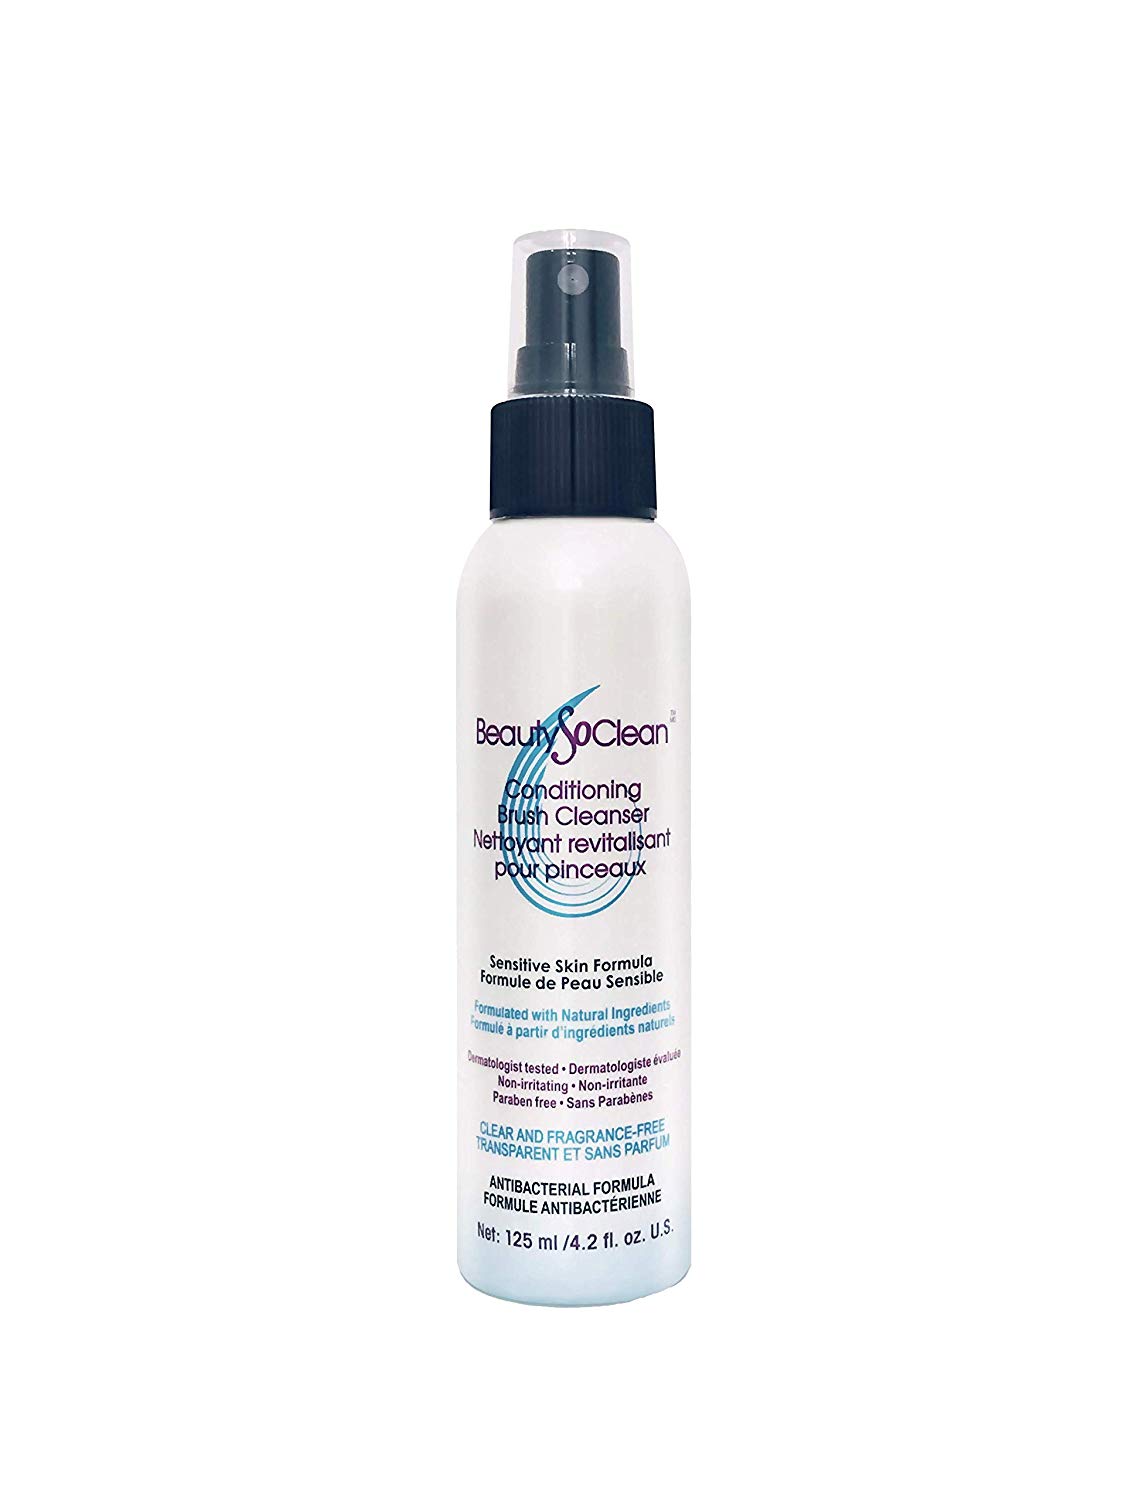 BeautySoClean - Conditioning Brush Cleaner, 125ml